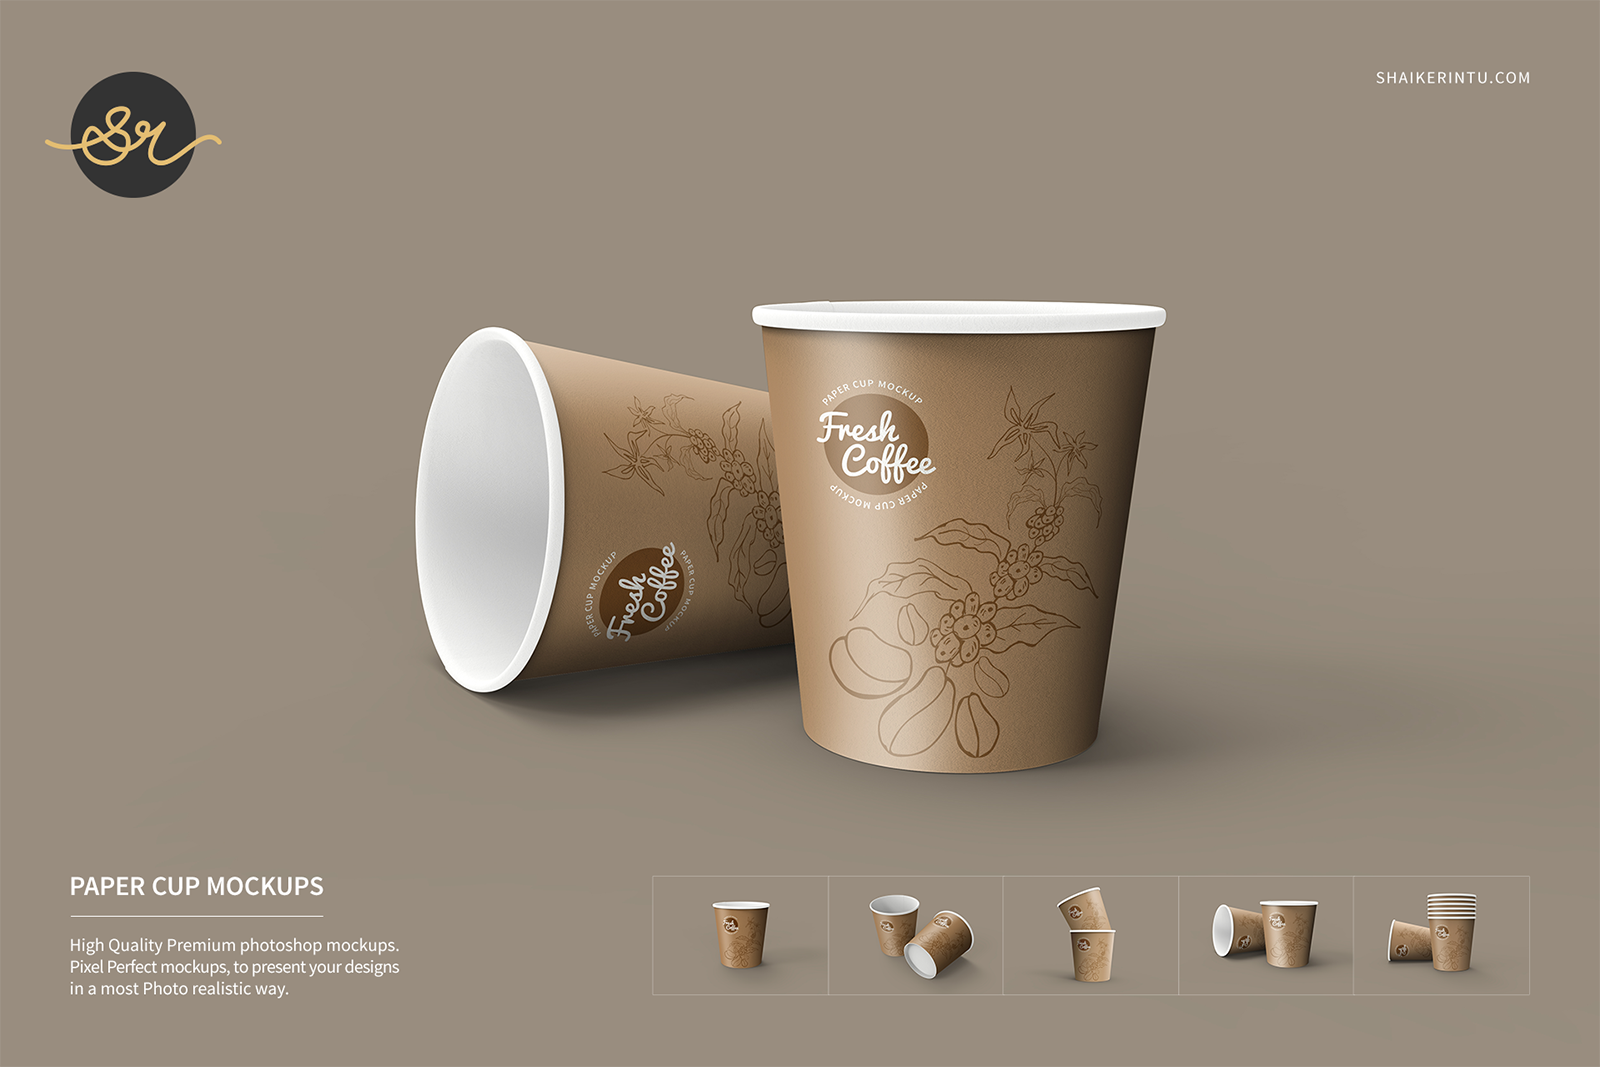 Download Mockups Free And Premium High Quality Psd Mokcups And Designs